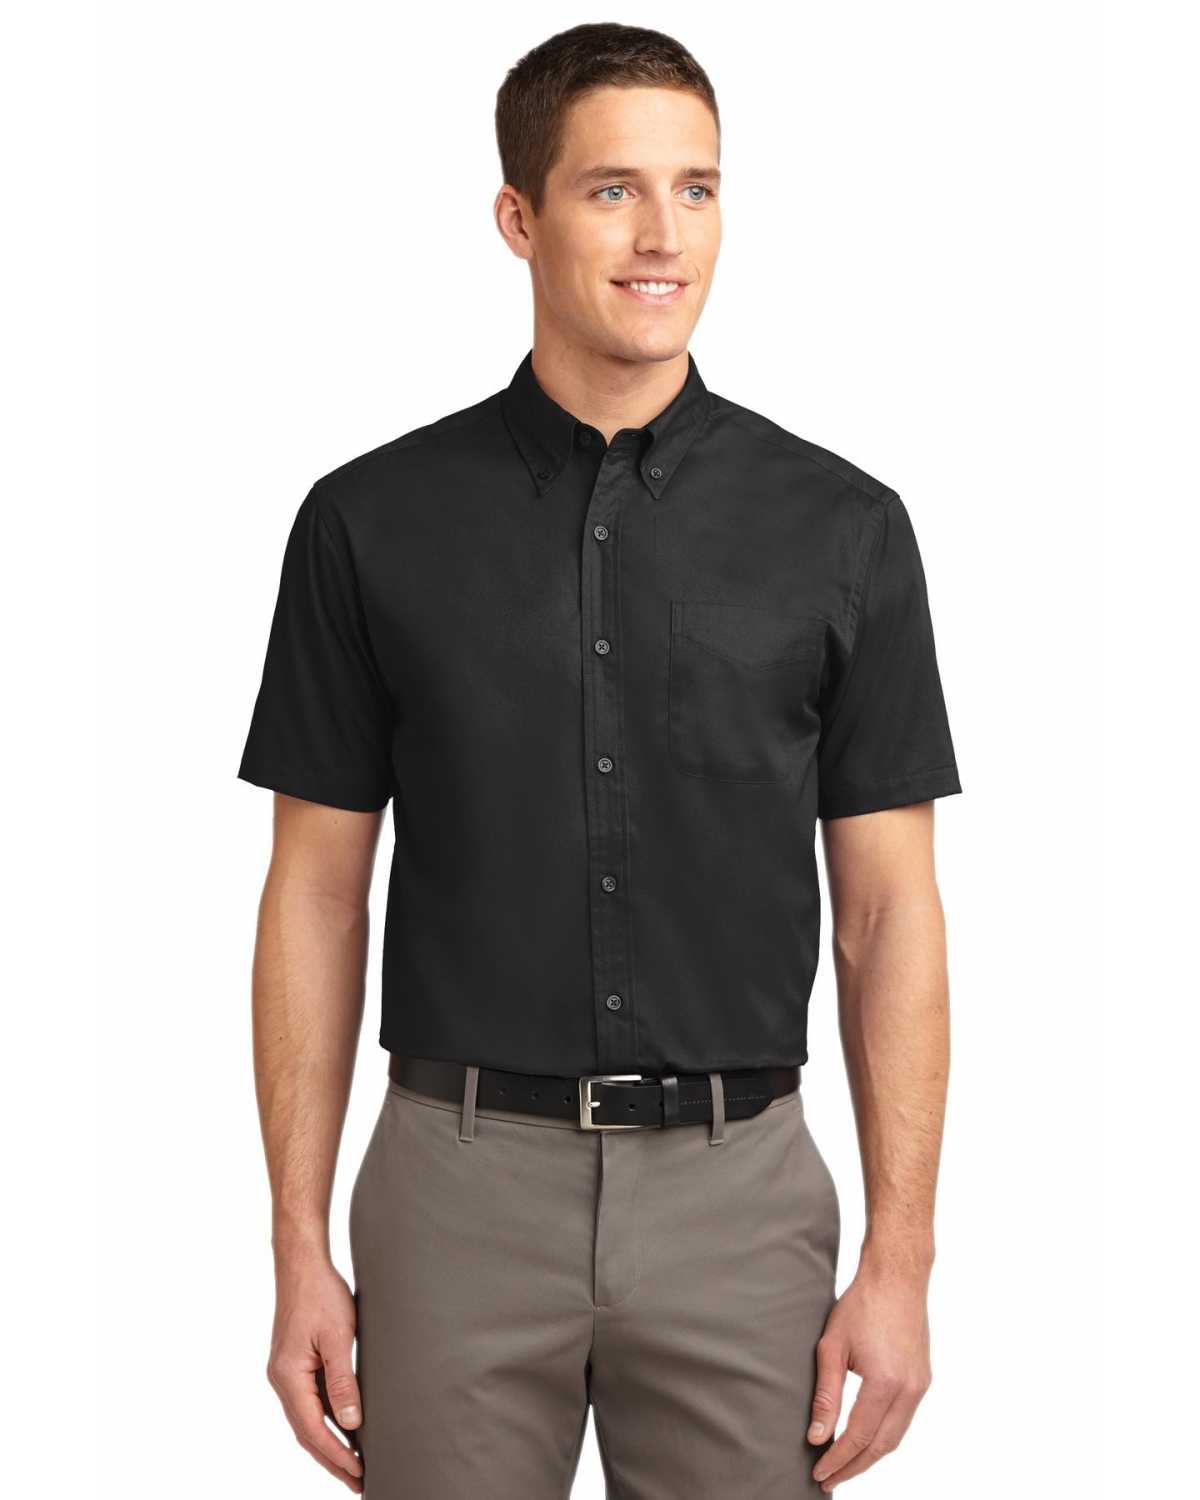 Port Authority S508 Short Sleeve Easy Care Shirt on discount ...